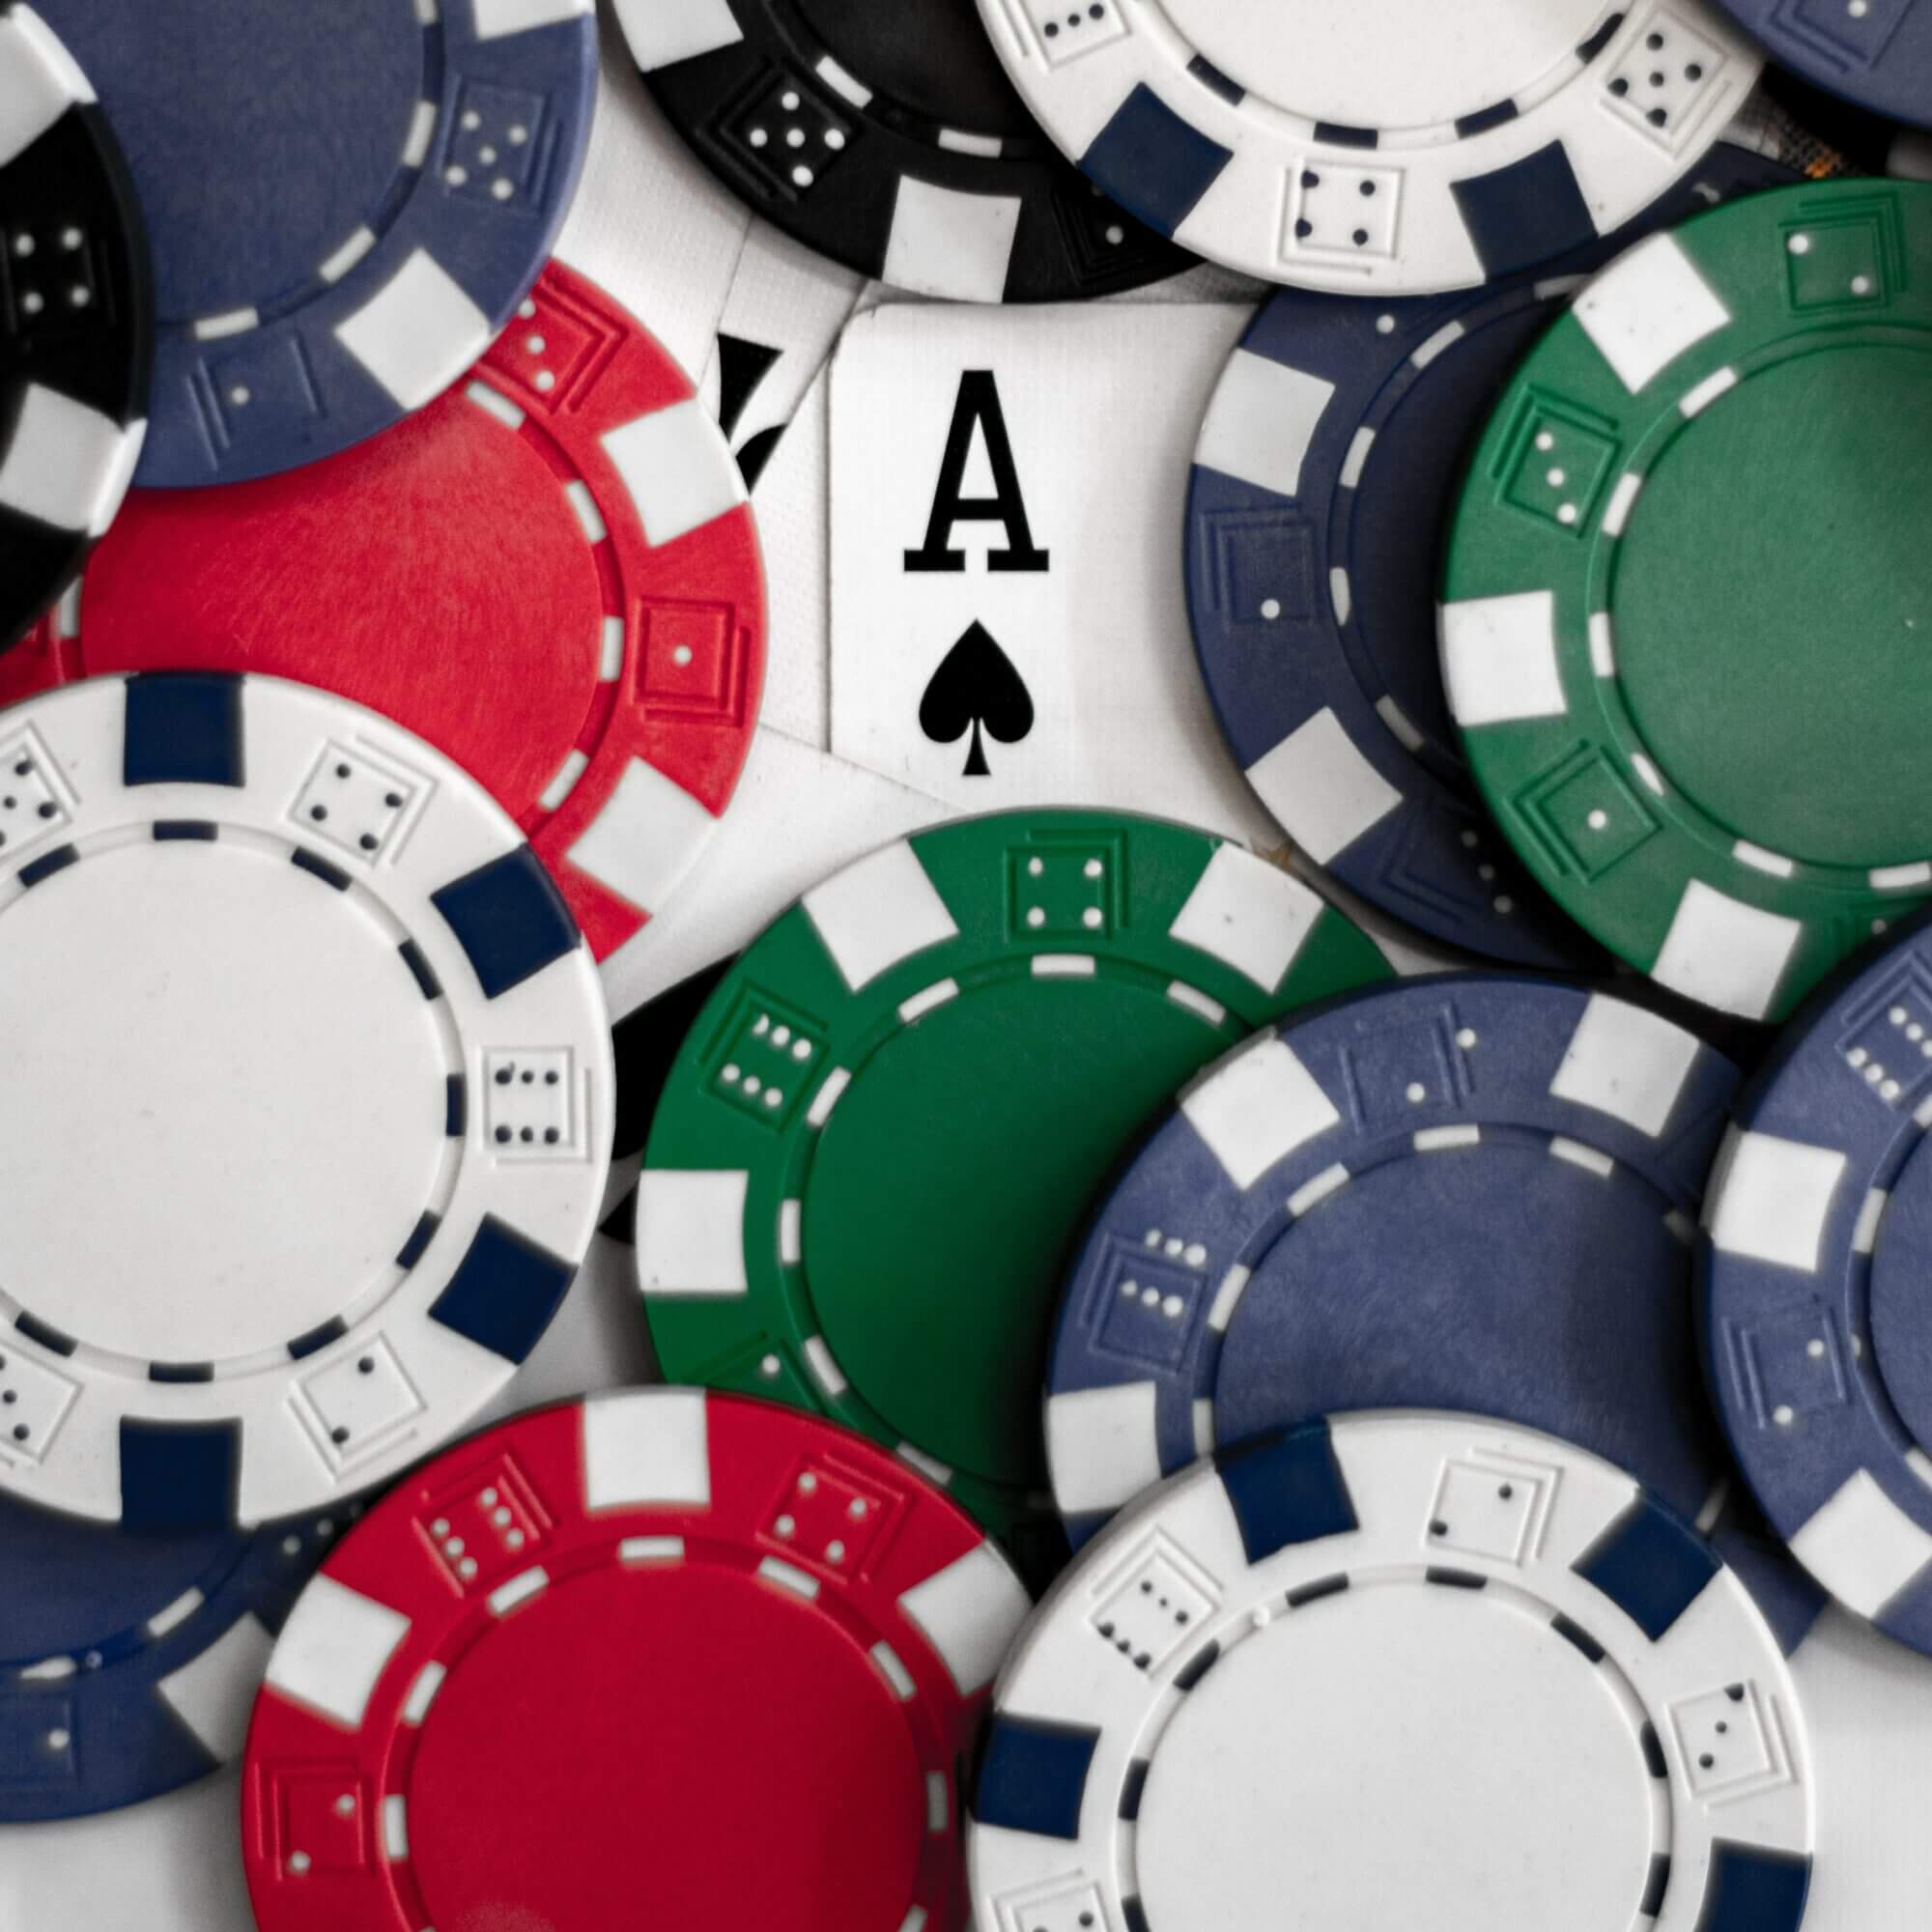 A group of poker chips with an ace in the middle.